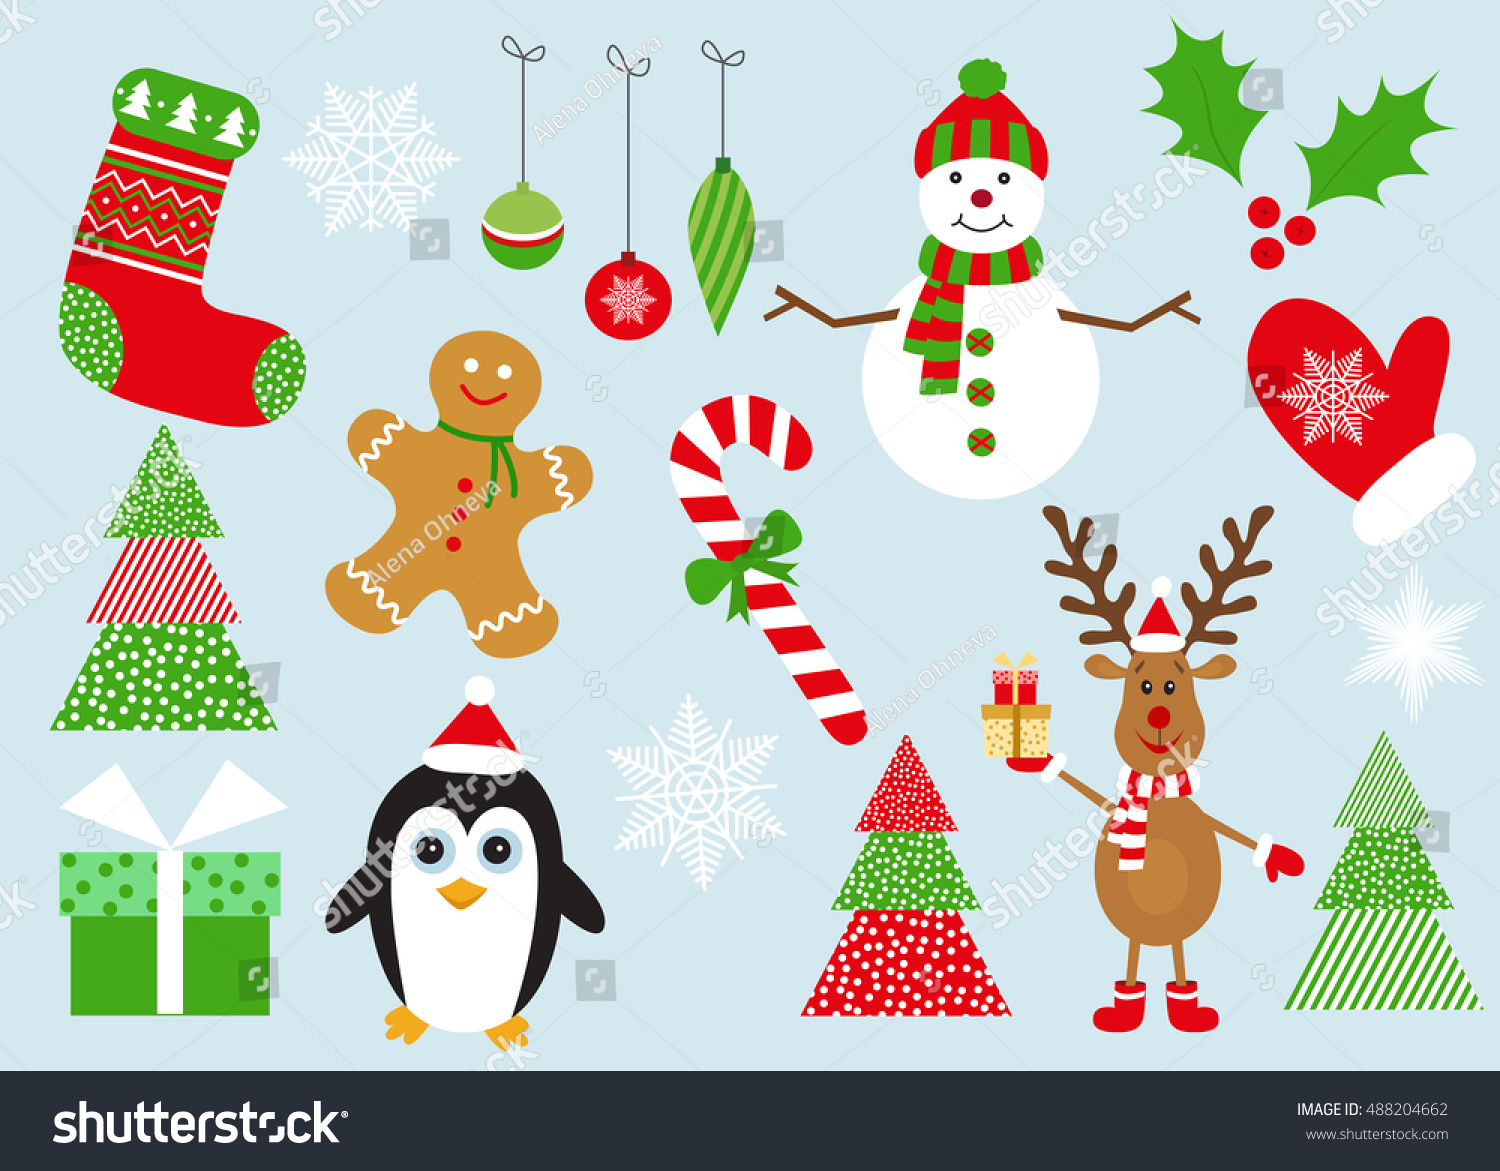 Merry Christmas Set Elements Symbols Collection Stock Vector (Royalty ...